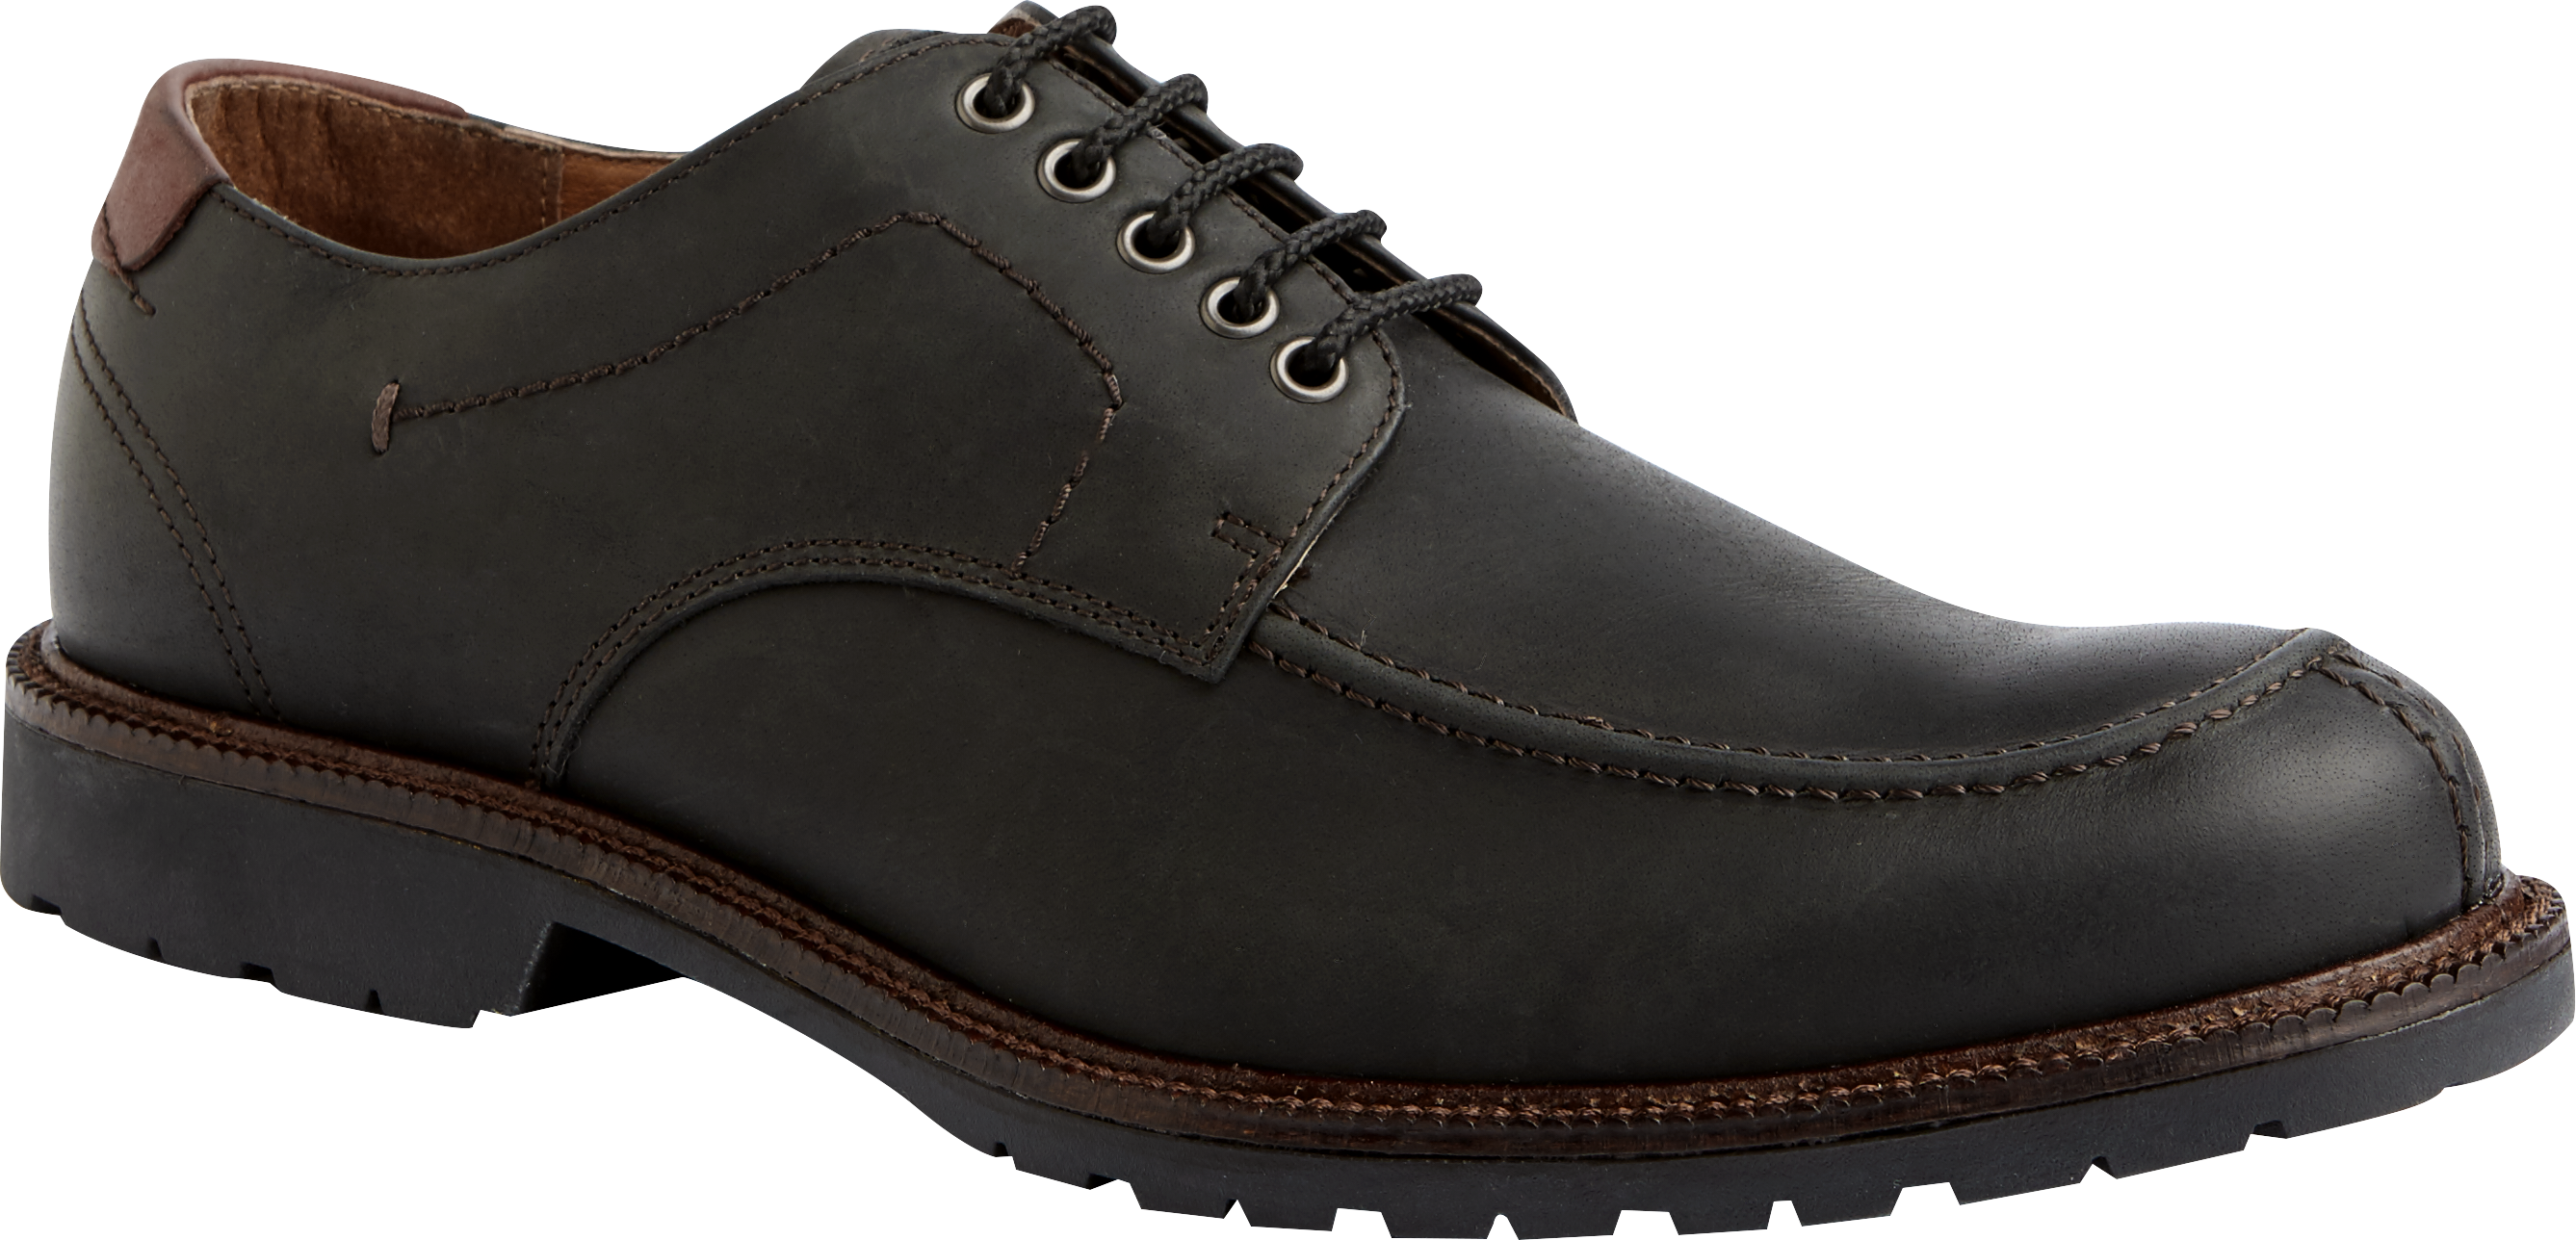 G. H. Bass Austin Oxfords CLEARANCE - Clearance Shoes | Jos A Bank